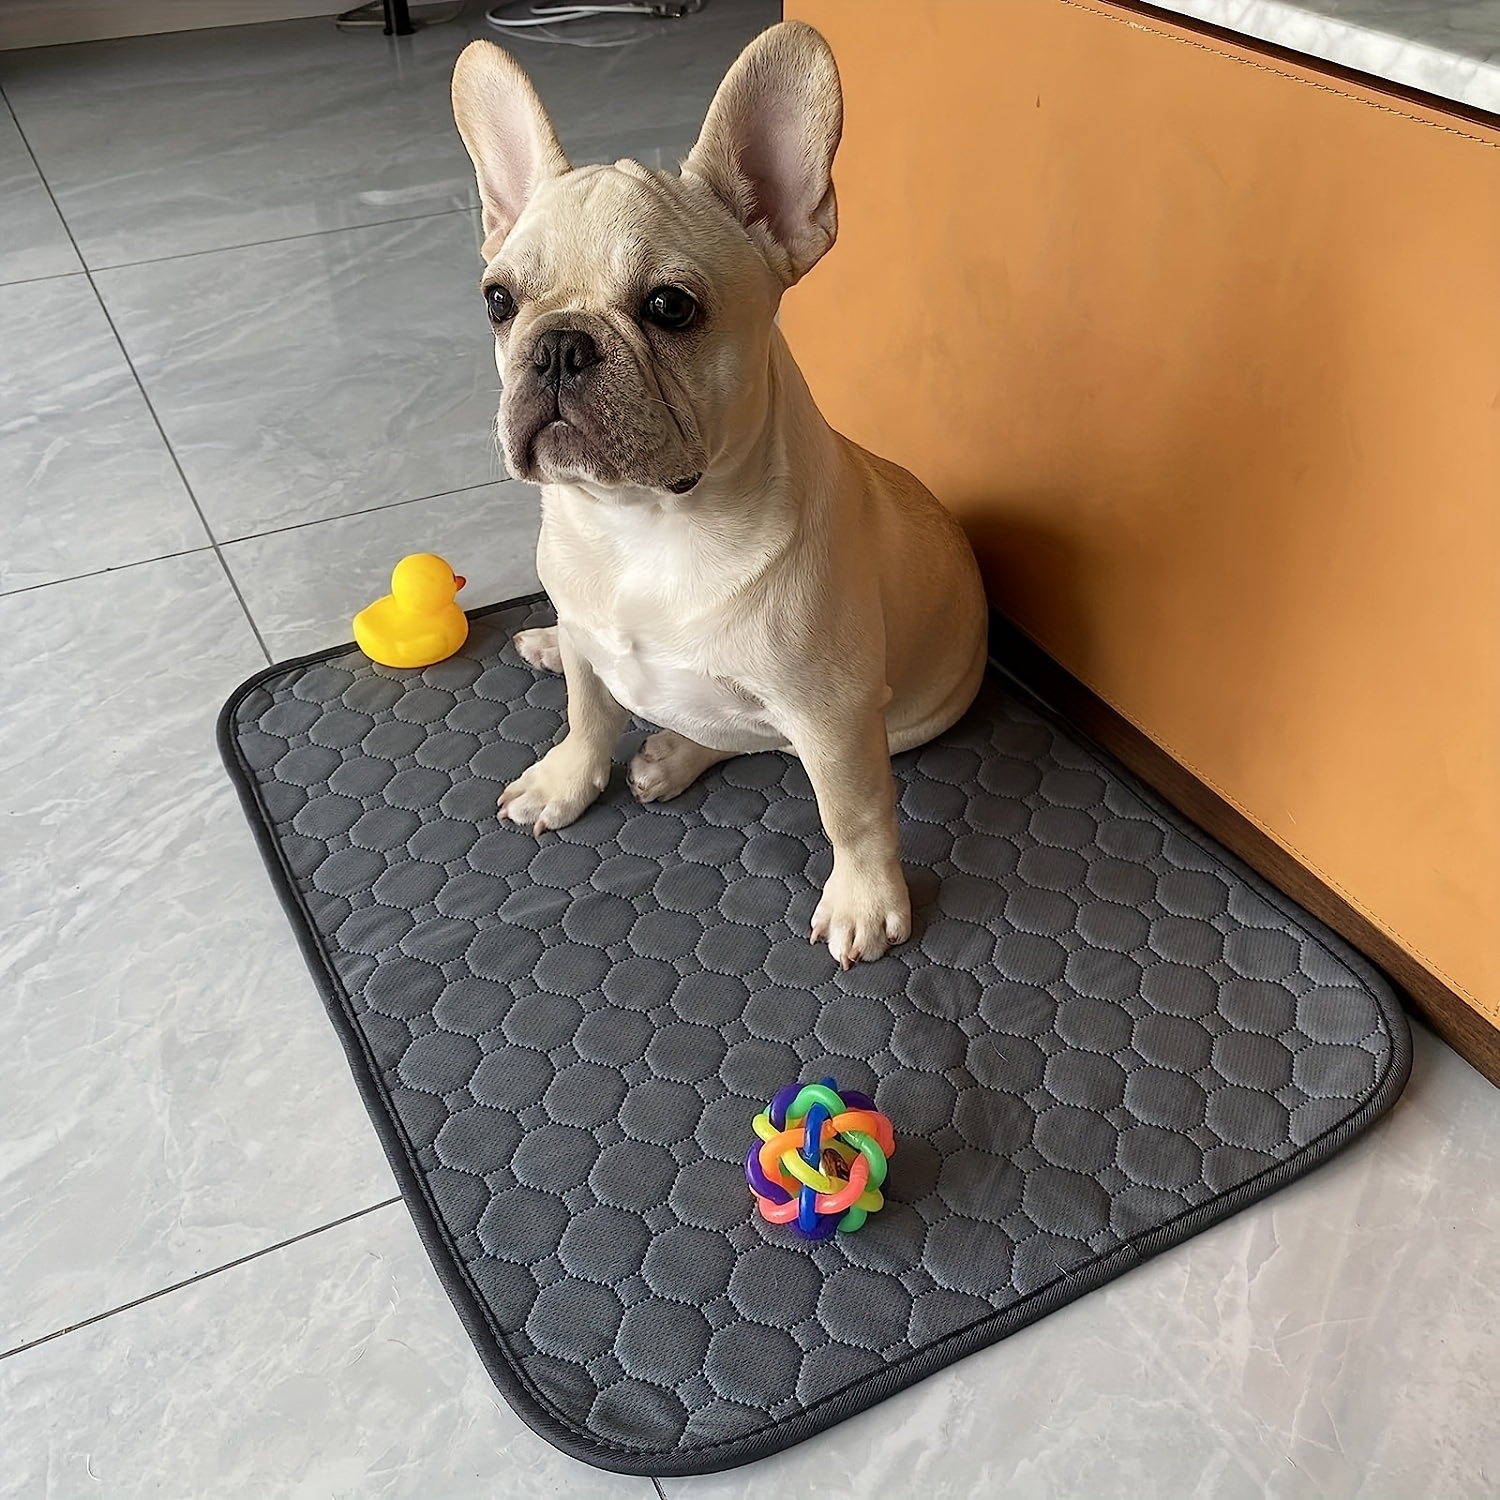 Washable Pee Pads for Dogs | Reusable Puppy Pads Pet Training Pads |  Reusable Pee Pads for Dogs | Washable Dog Training Pads, Washable Potty  Pads